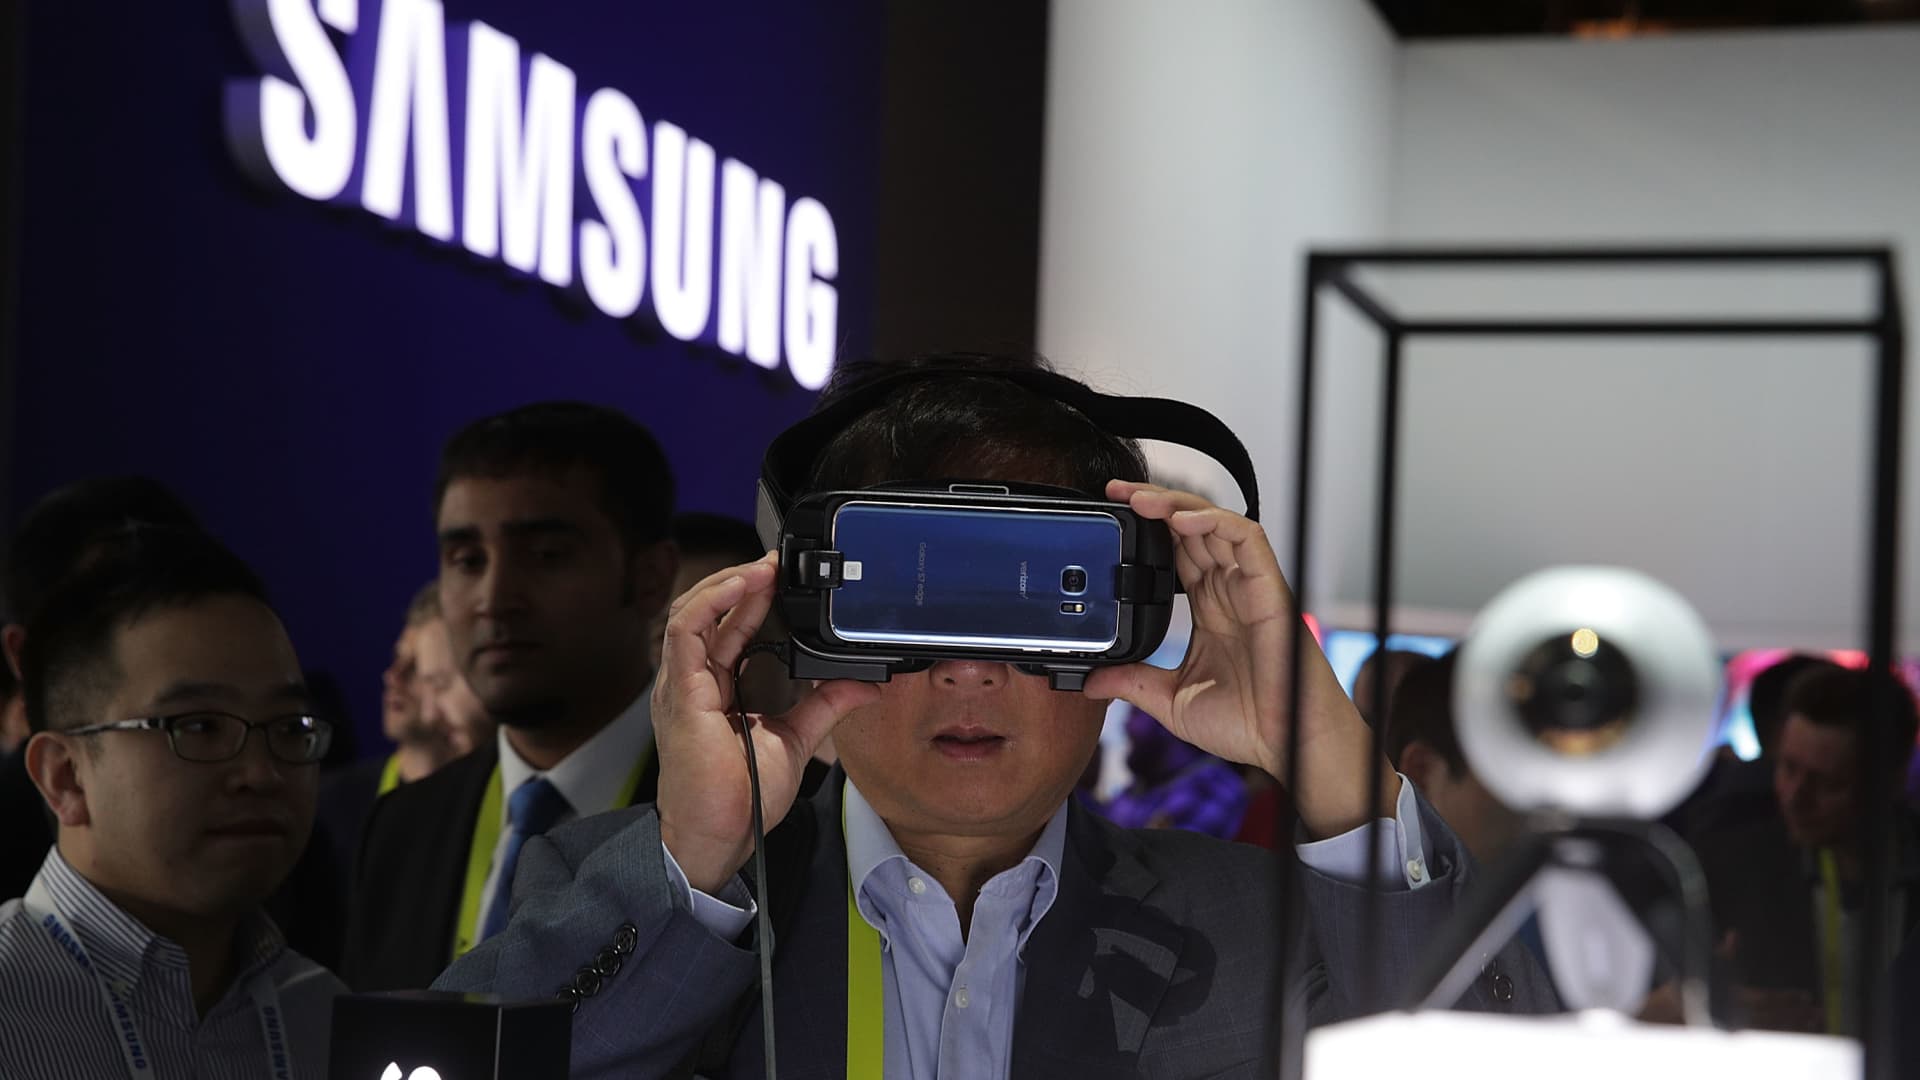 Samsung is 'working out' a roadmap for mixed reality devices